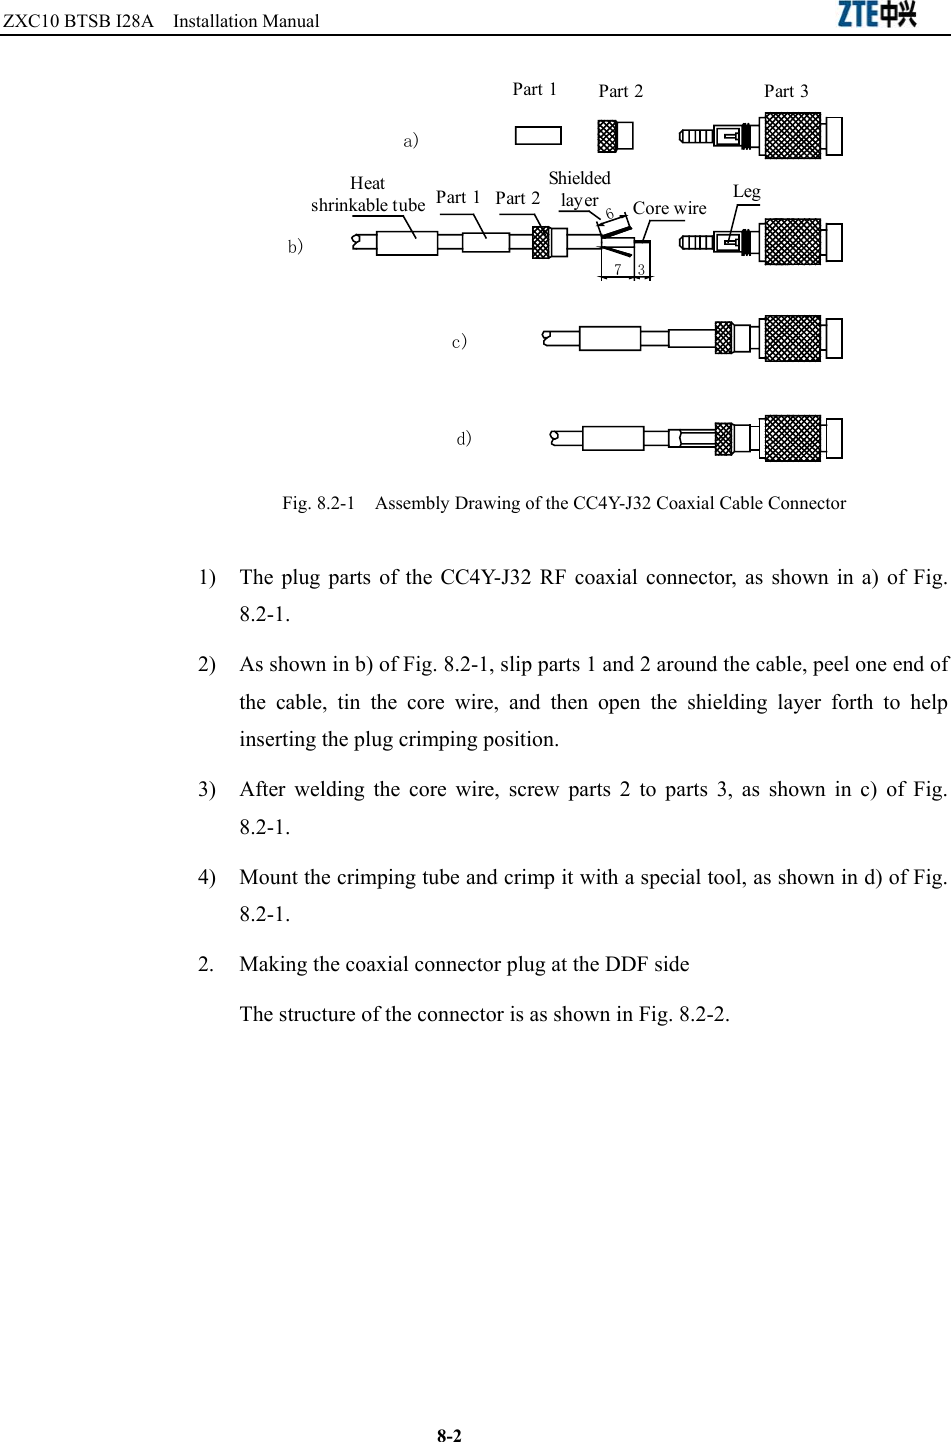 ZXC10 BTSB I28A  Installation Manual                                                          8-2 7 36ShieldedlayerPart 1d)c)b)a)Heatshrinkable tubePart 2 Part 3Part 1 Part 2 Core wireLeg Fig. 8.2-1    Assembly Drawing of the CC4Y-J32 Coaxial Cable Connector   1)  The plug parts of the CC4Y-J32 RF coaxial connector, as shown in a) of Fig. 8.2-1.  2)  As shown in b) of Fig. 8.2-1, slip parts 1 and 2 around the cable, peel one end of the cable, tin the core wire, and then open the shielding layer forth to help inserting the plug crimping position. 3)  After welding the core wire, screw parts 2 to parts 3, as shown in c) of Fig. 8.2-1.  4)  Mount the crimping tube and crimp it with a special tool, as shown in d) of Fig. 8.2-1.  2.  Making the coaxial connector plug at the DDF side The structure of the connector is as shown in Fig. 8.2-2. 